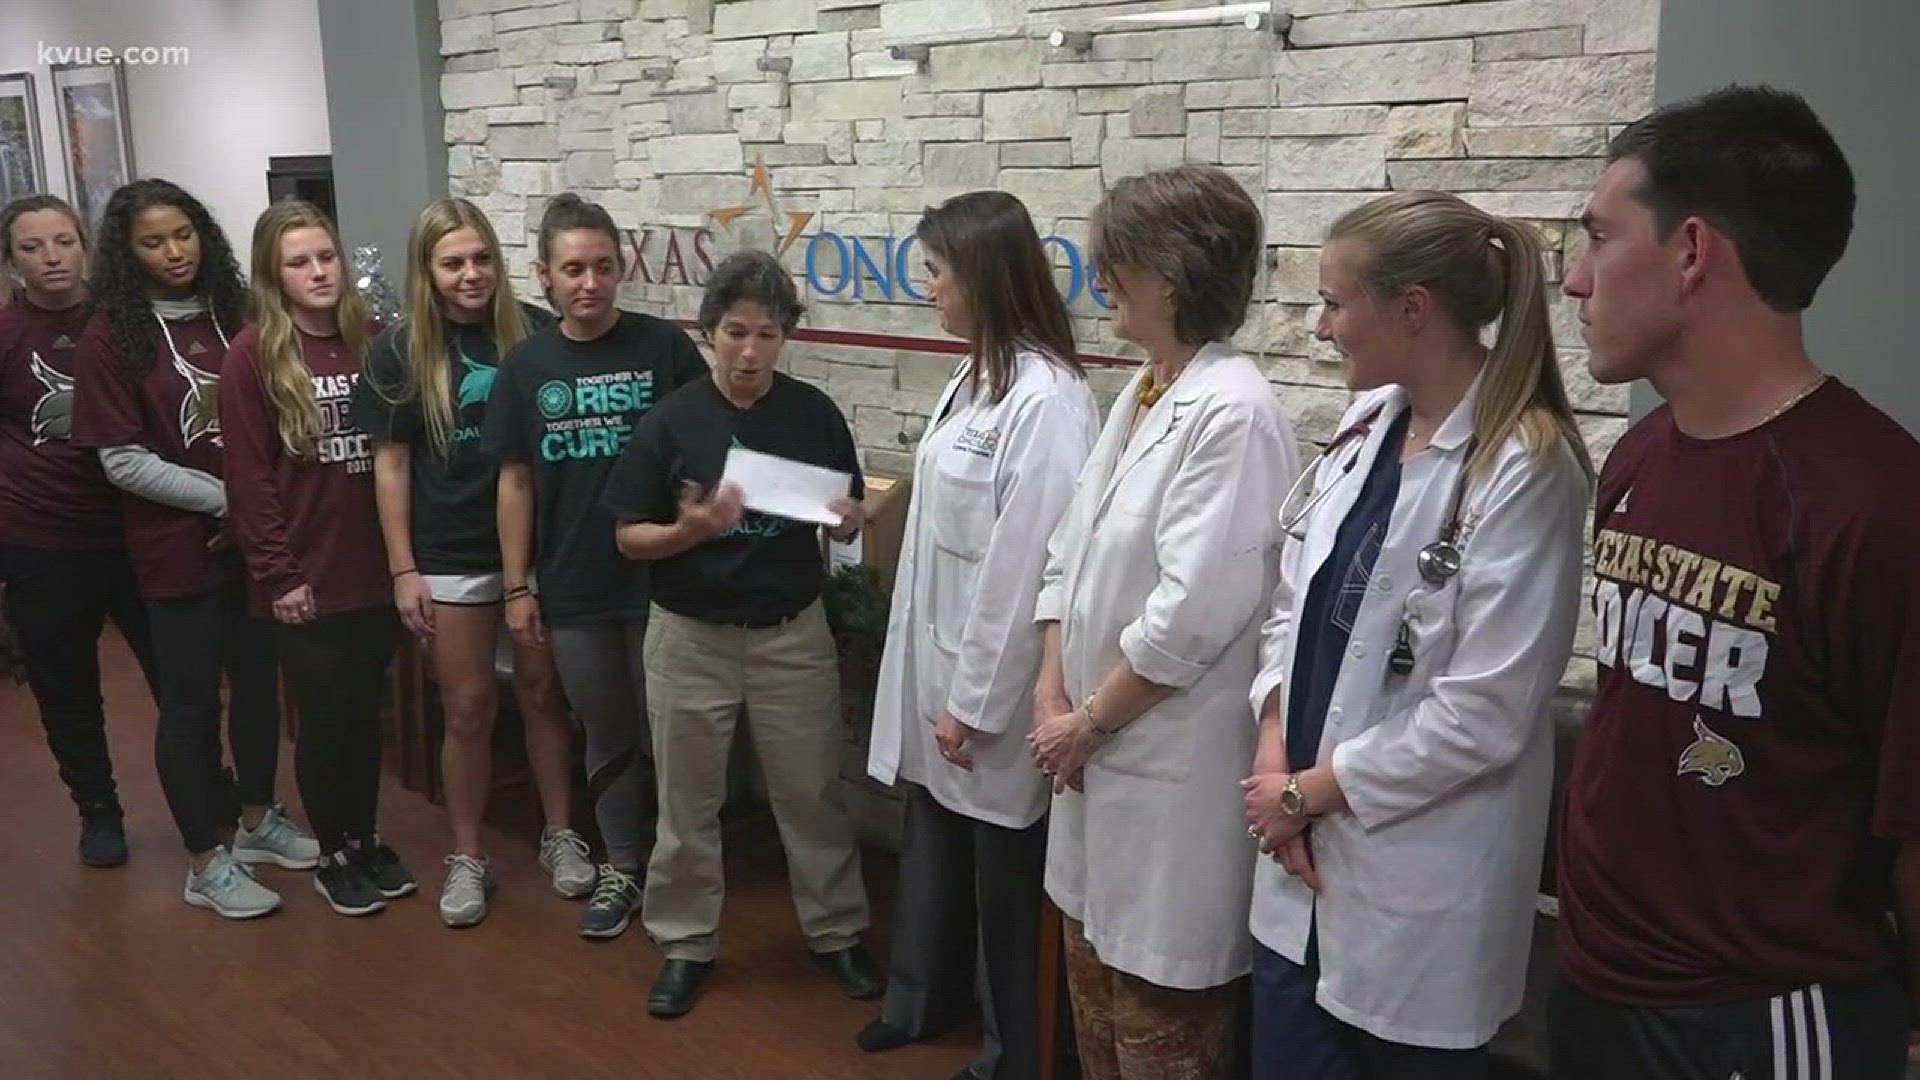 The coach presented a $4,500 check to benefit a Texas Oncology Foundation scholarship.